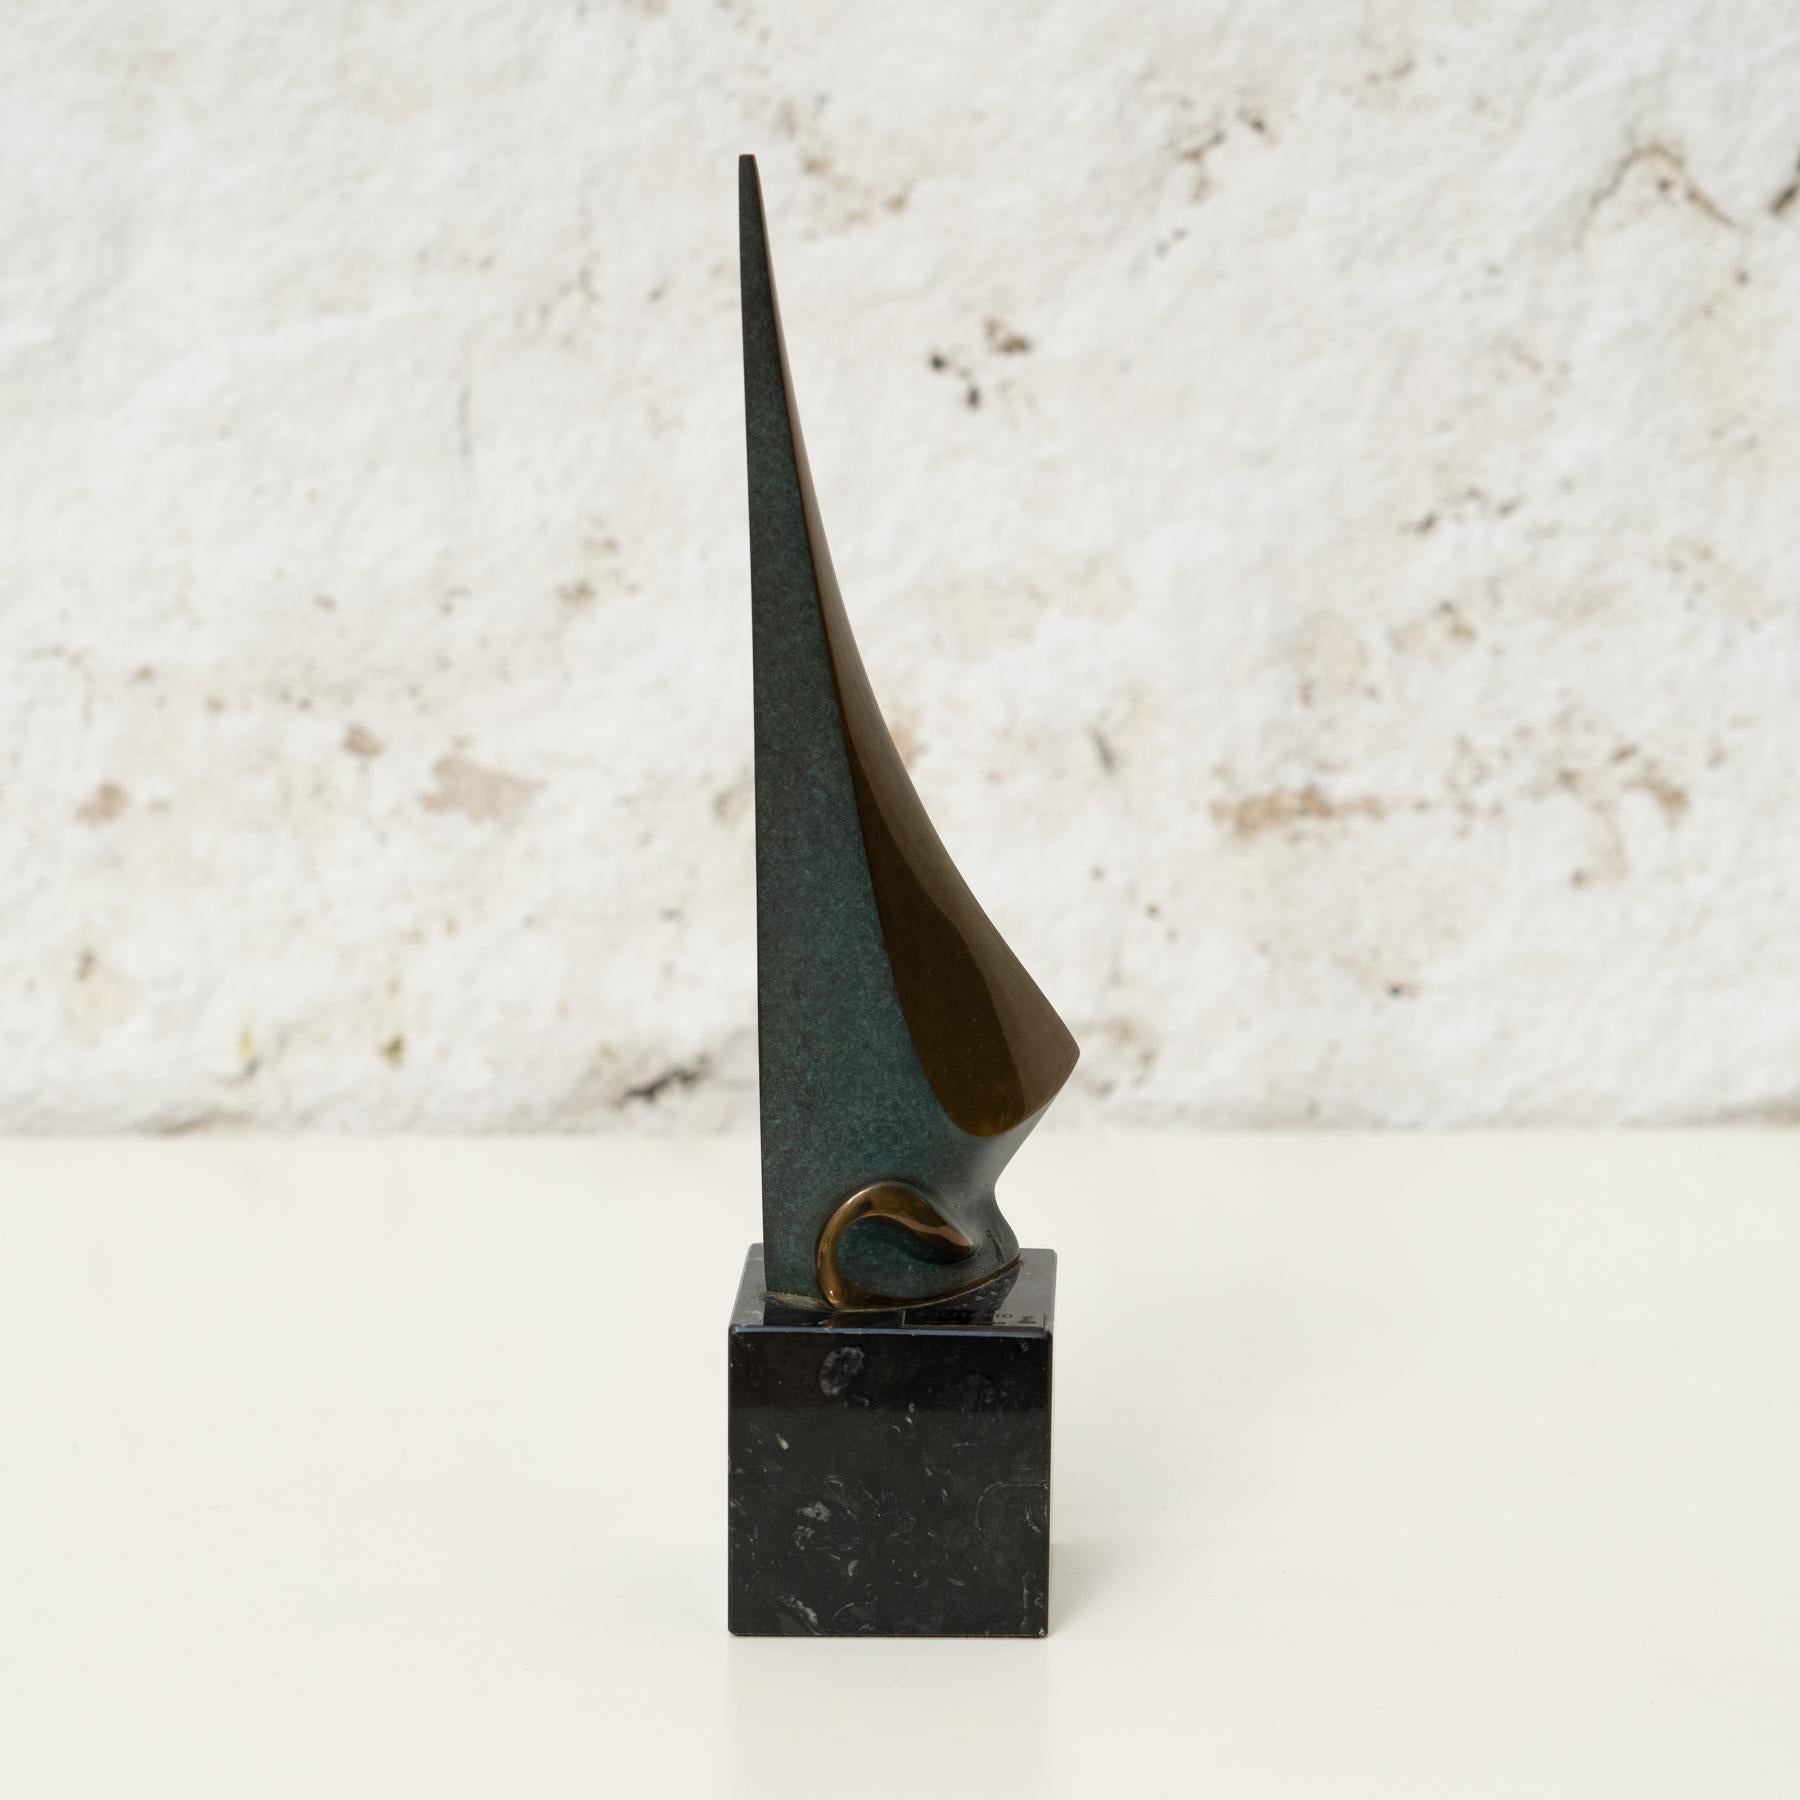     Artist: Jordi Abad (Barcelona, 20th Century)
    Title: Solitario
    Material: Gilded Bronze on Veined Black Marble Base
    Dimensions: 32 x 7 x 7 cm (with base)
    Signed and Foundry Seal

Original Condition  Gilded Beauty  Timeless